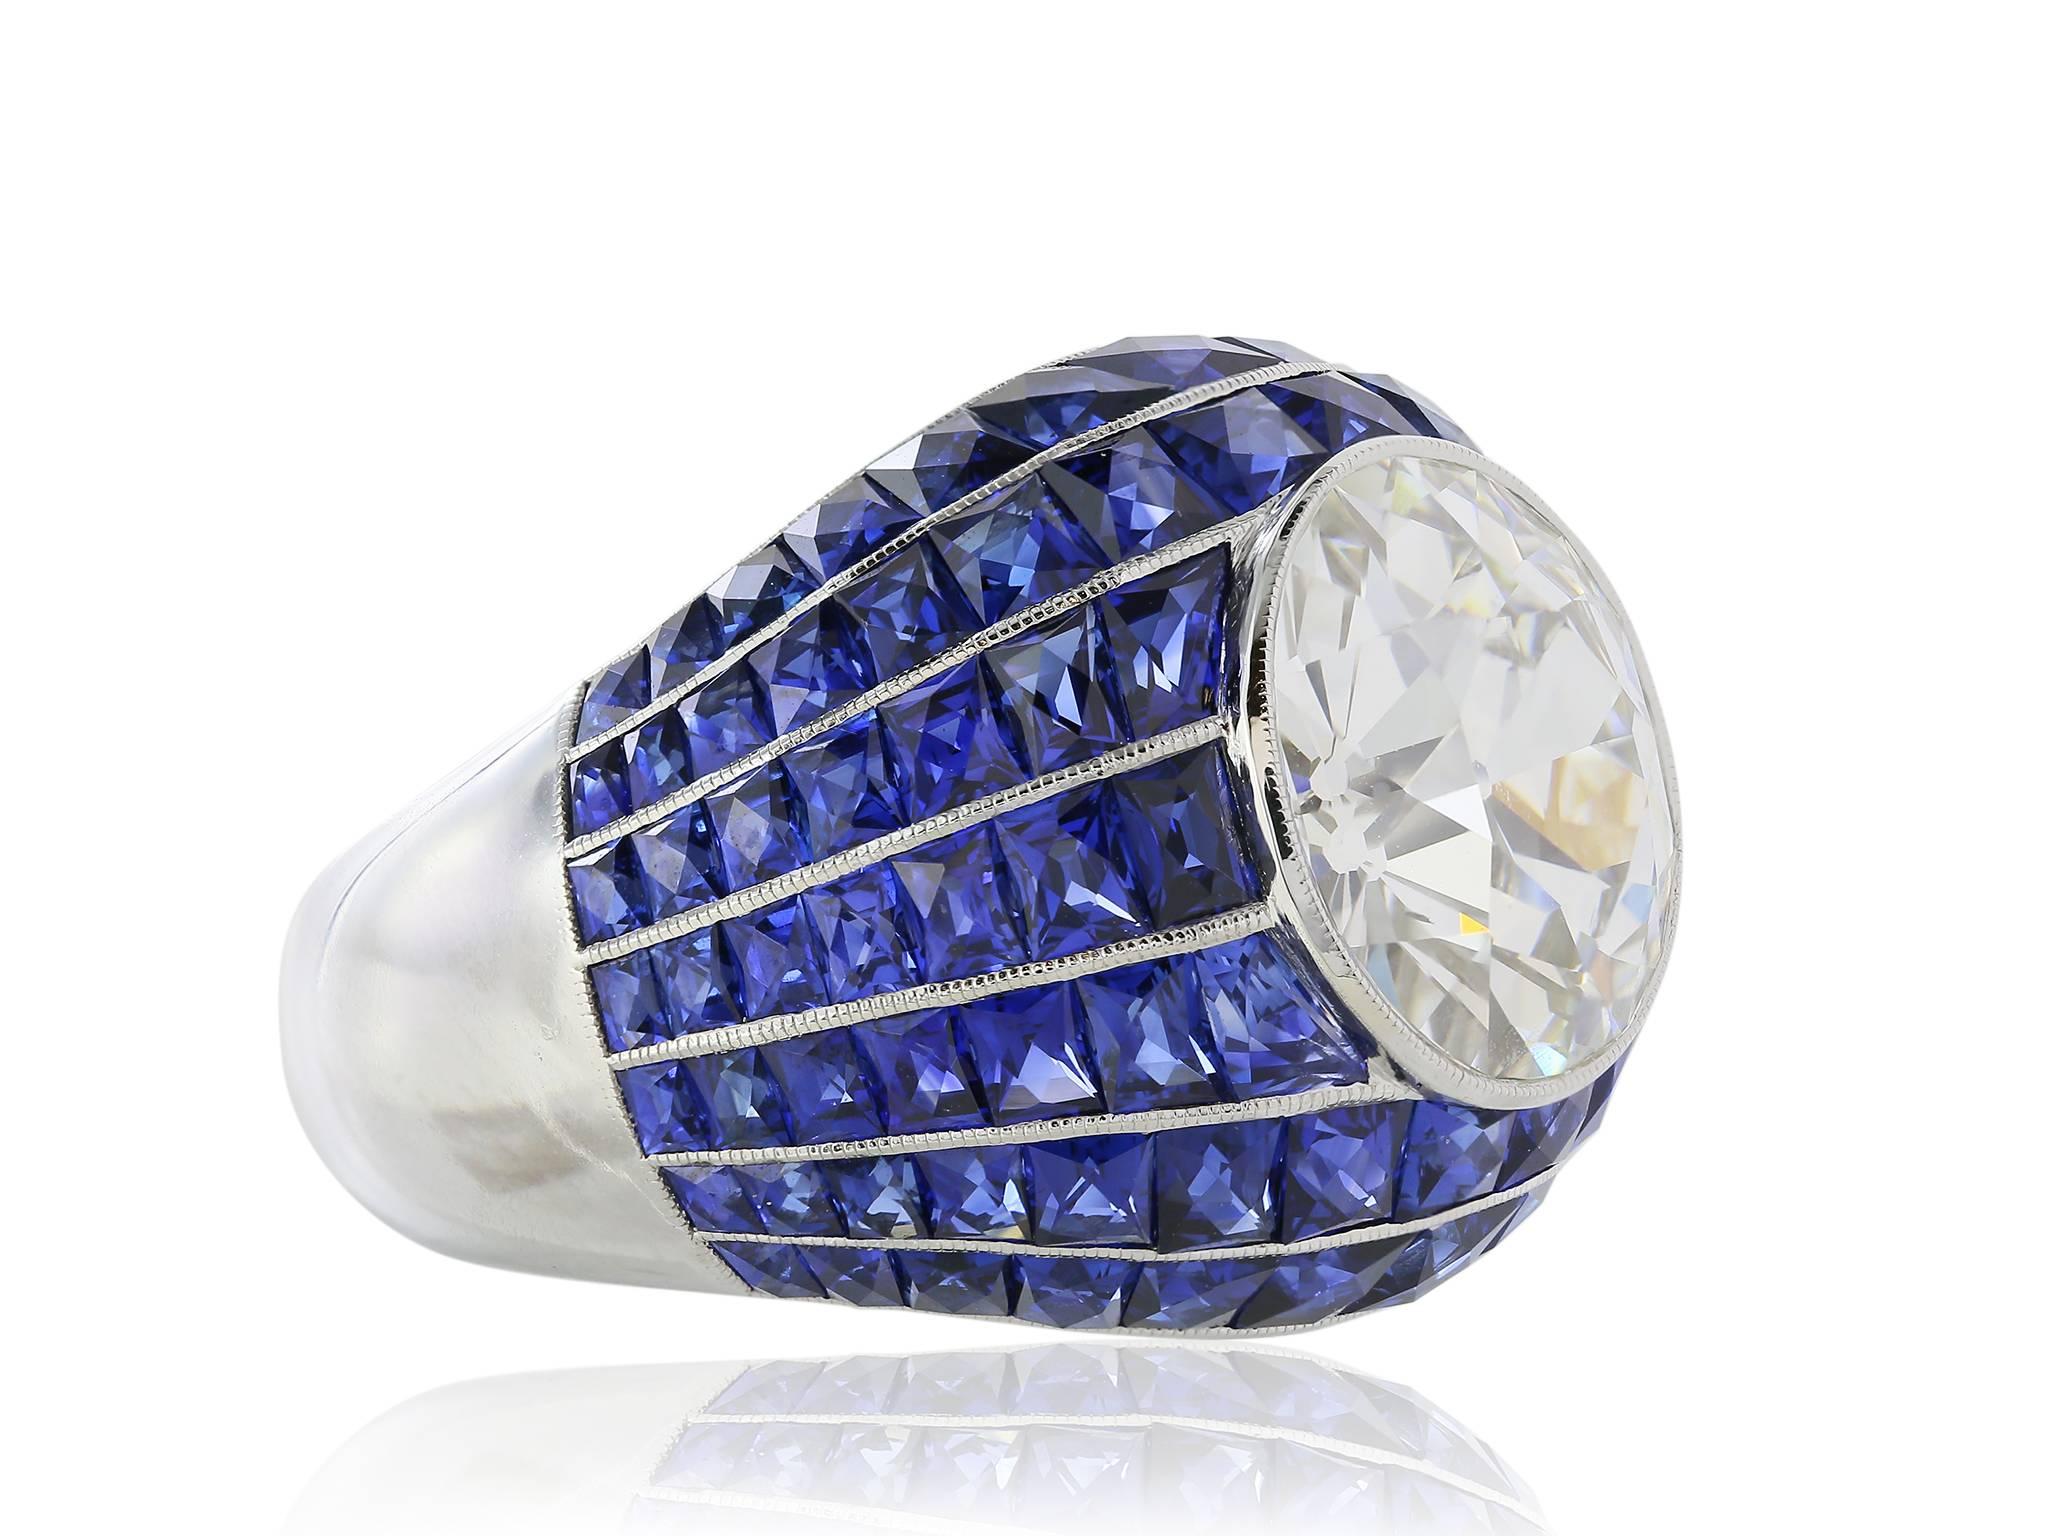 Platinum diamond and sapphire ring, featuring one 5.03ct. Old European Cut diamond GIA certified J/VS2 set with 7.35cts of square cut sapphires.